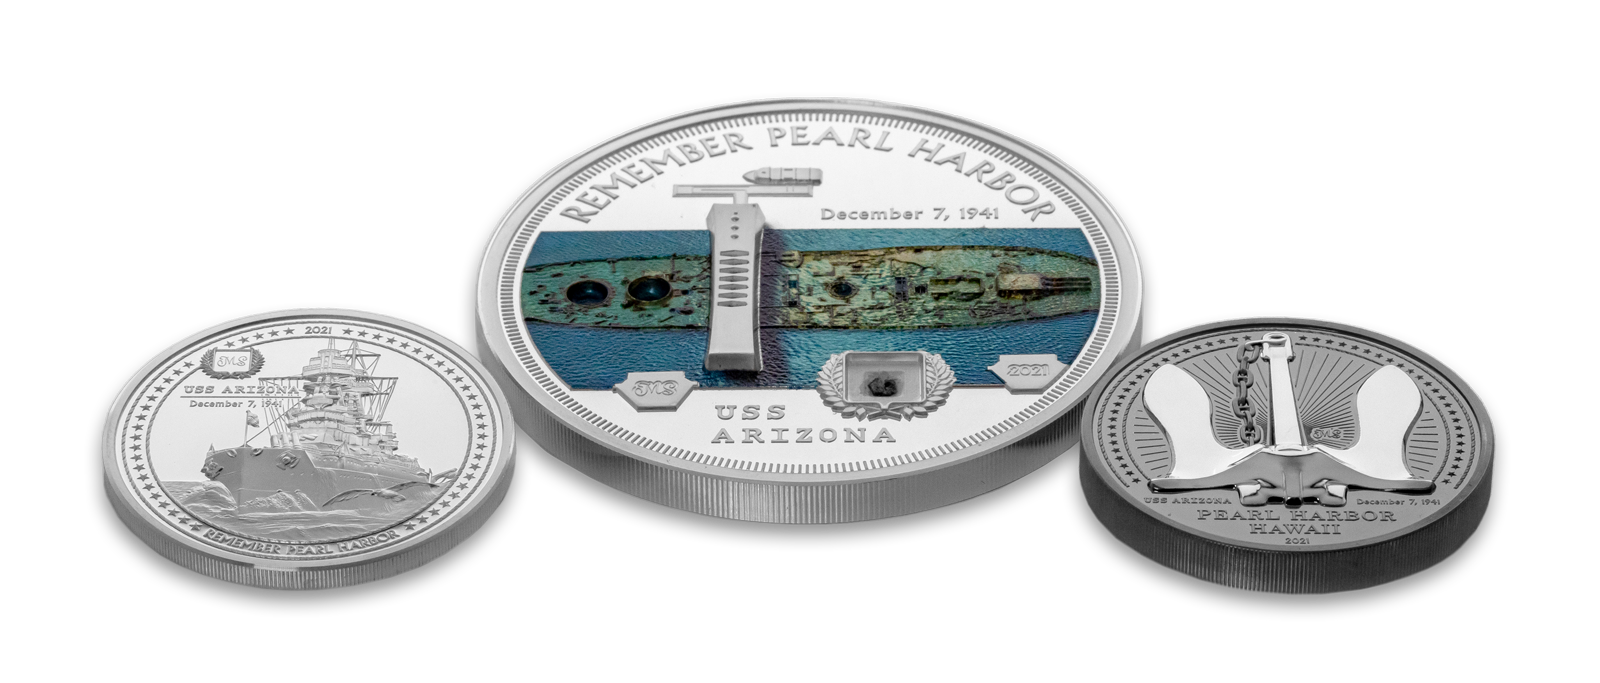 Miles Standish Designed USS Arizona Coin Collection